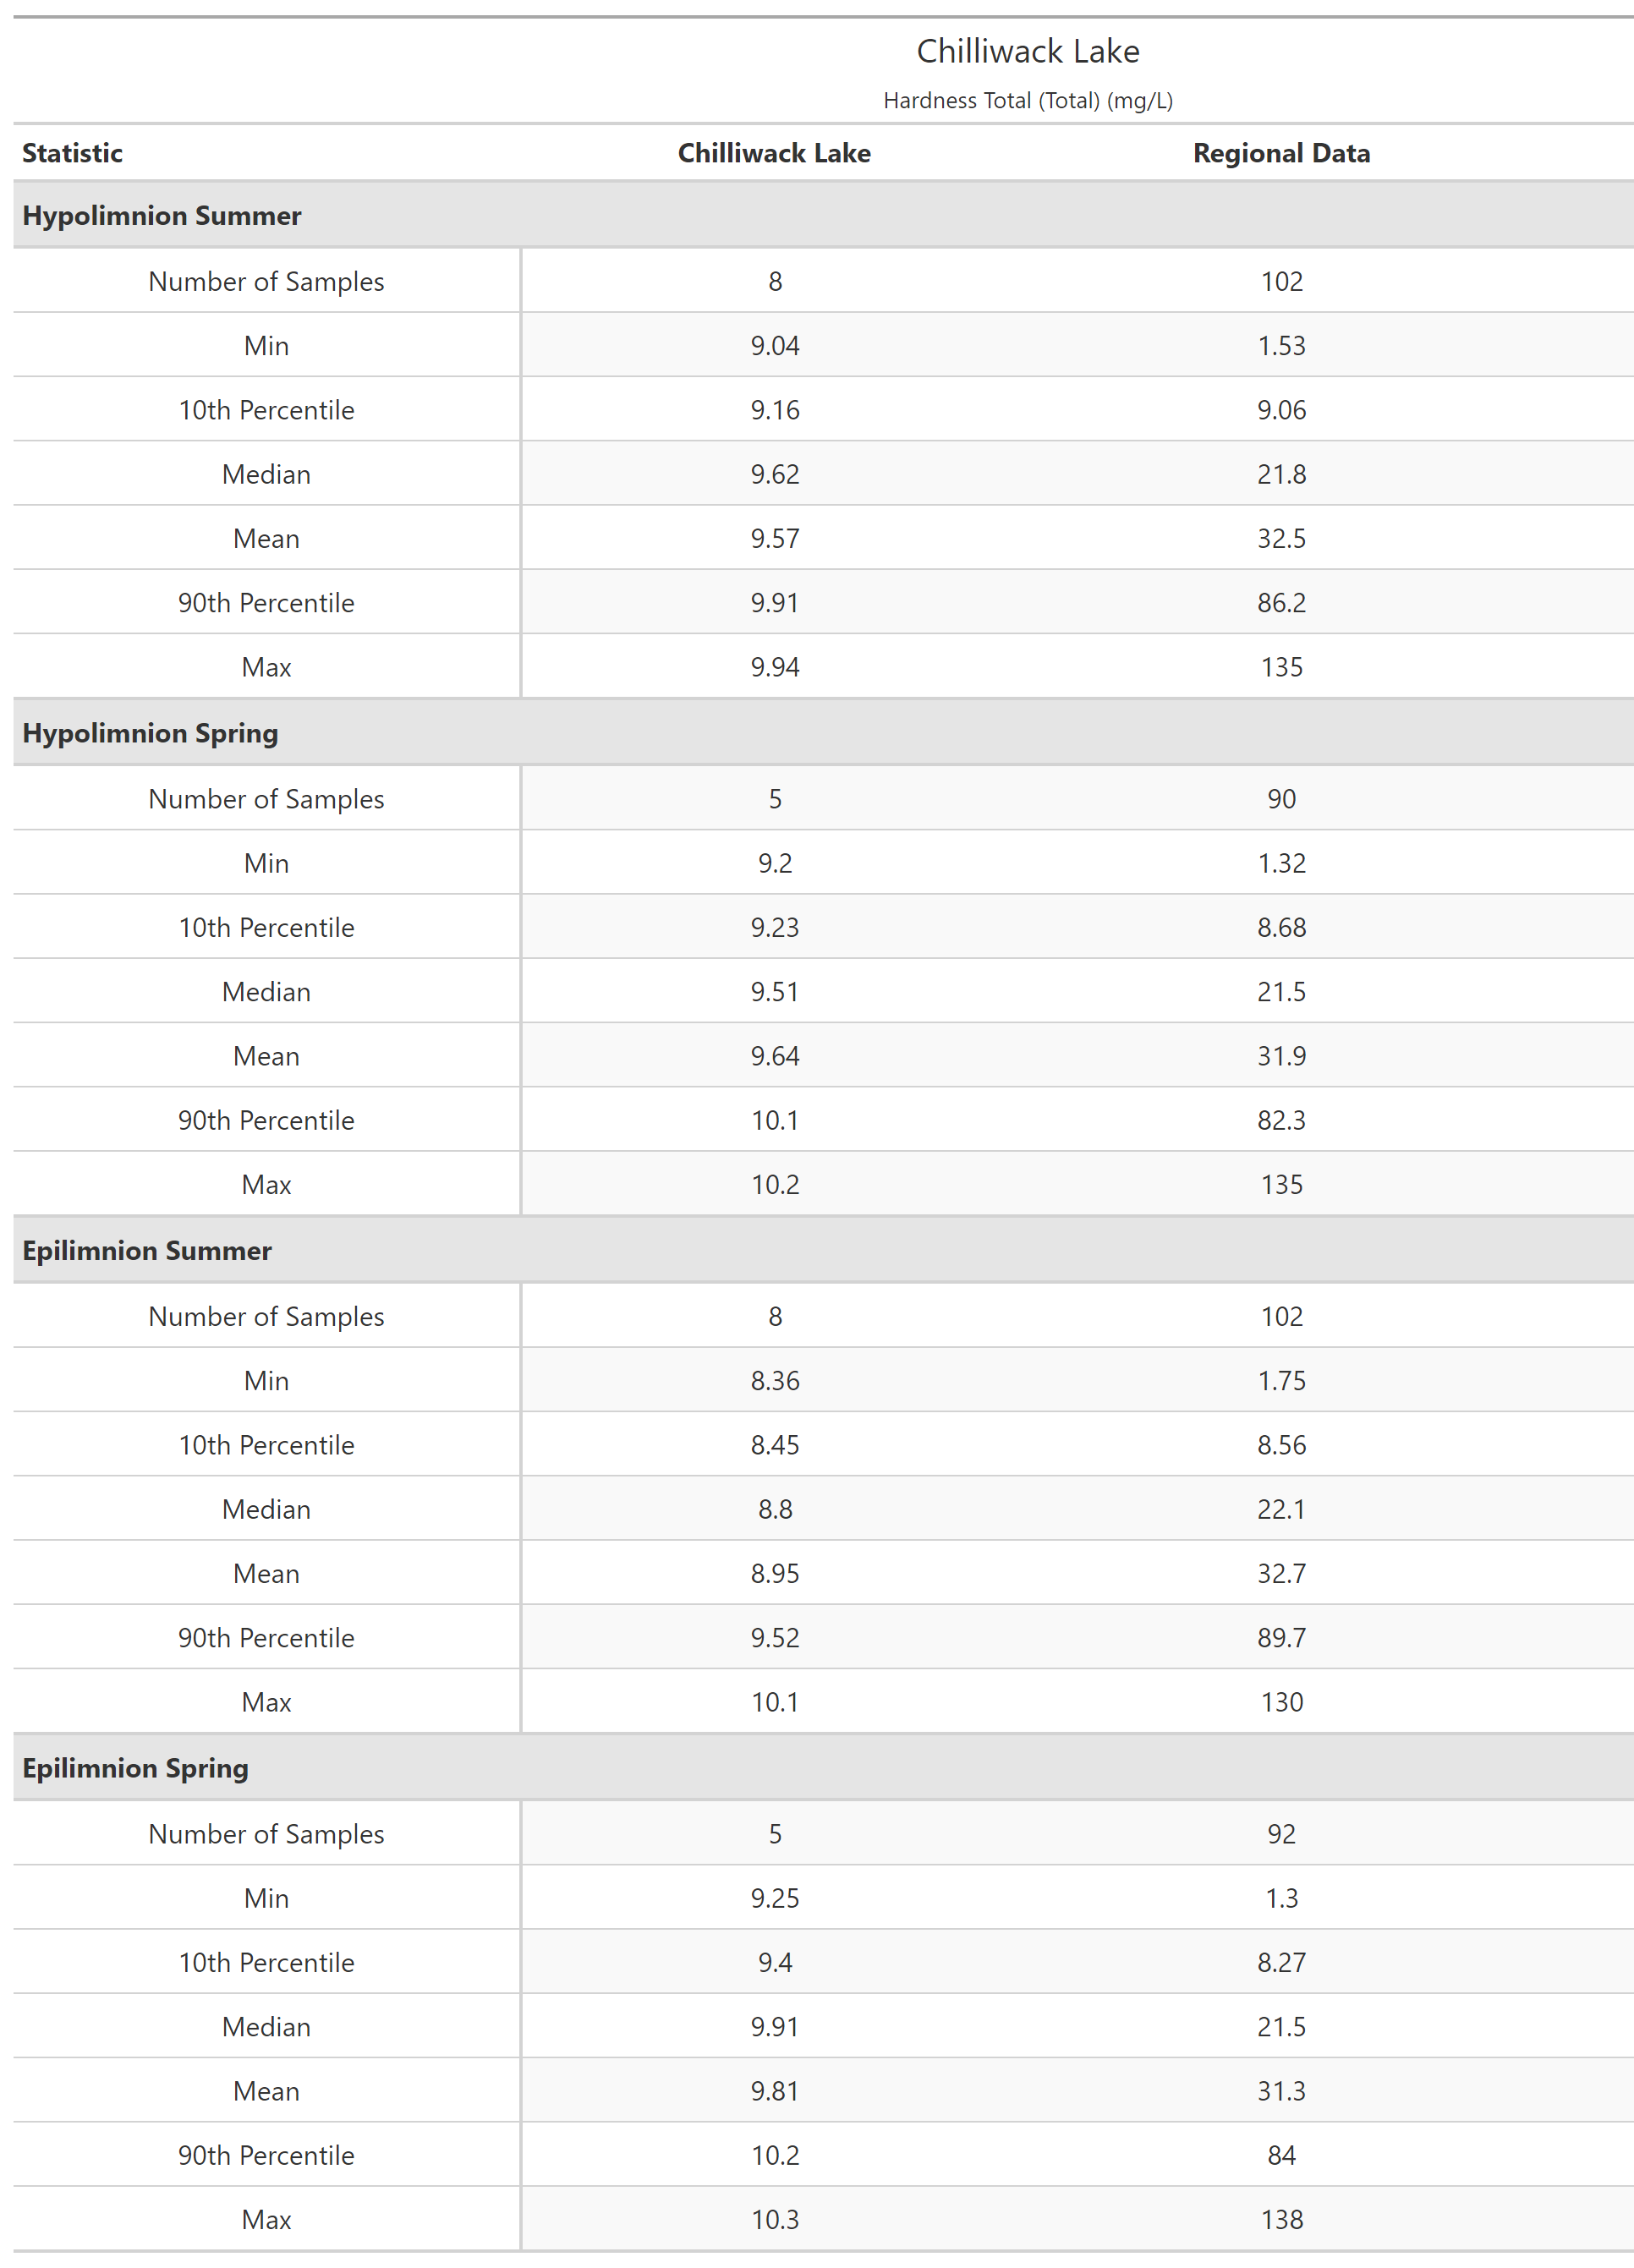 A table of summary statistics for Hardness Total (Total) with comparison to regional data